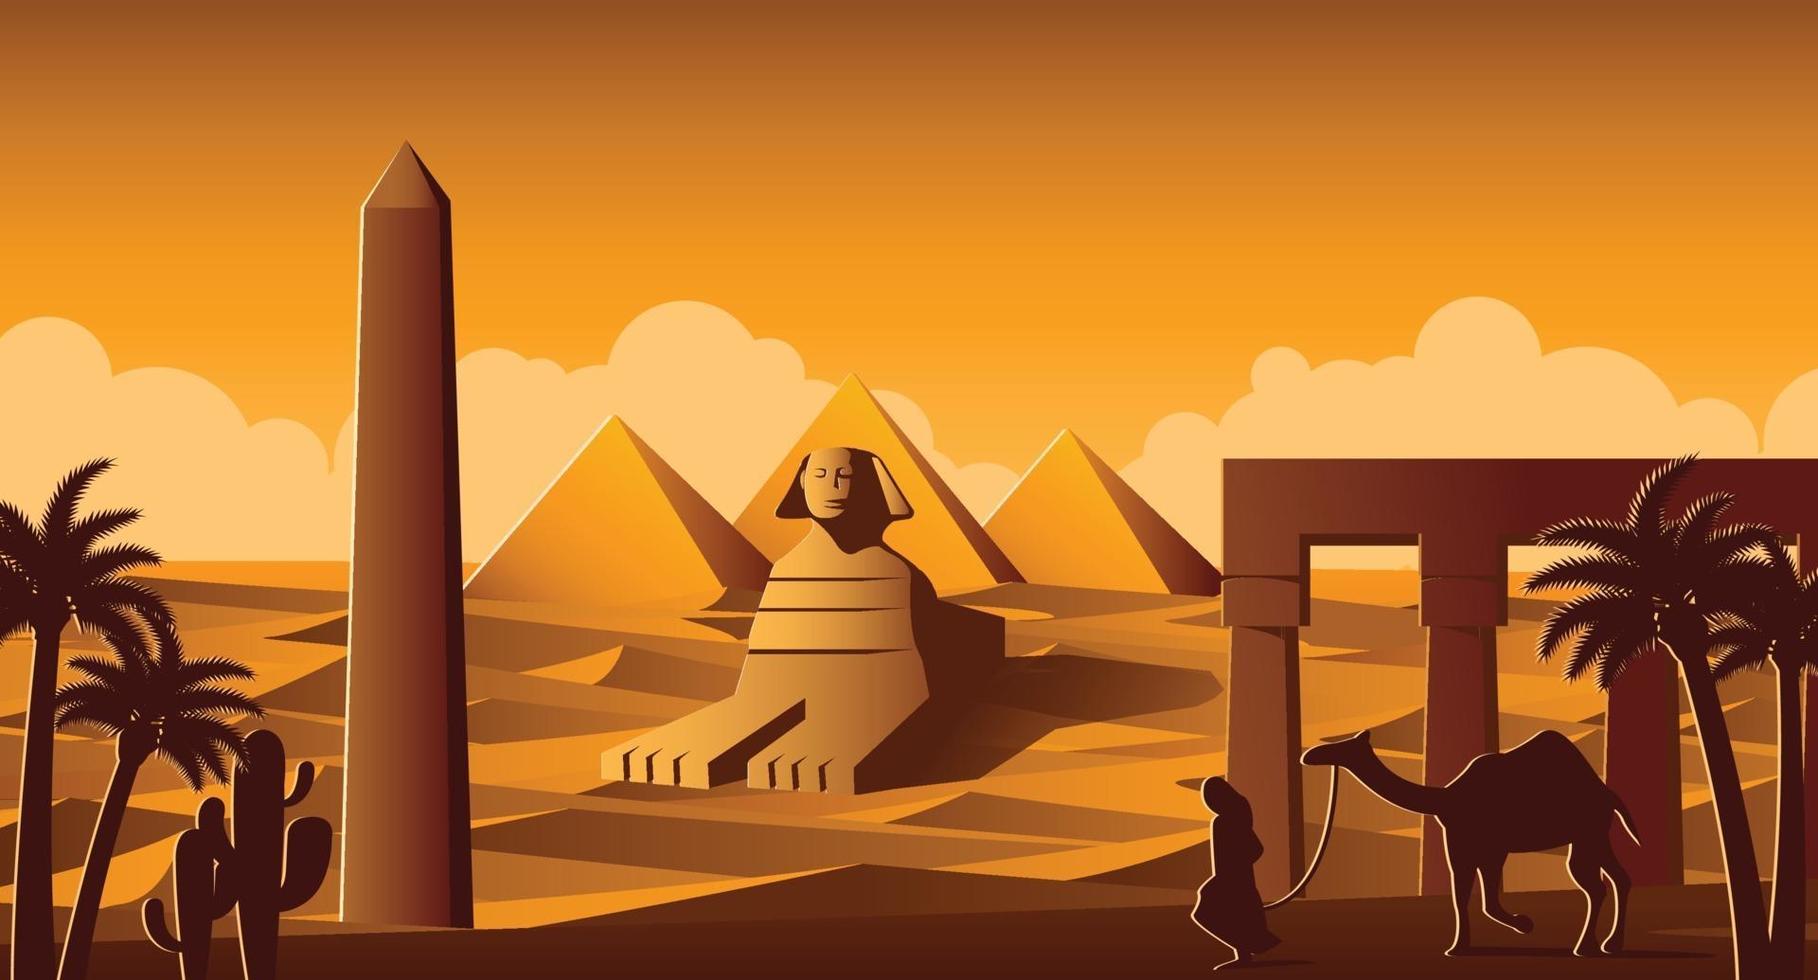 Sphinx and Pyramidm famous landmarks of Egypt vector